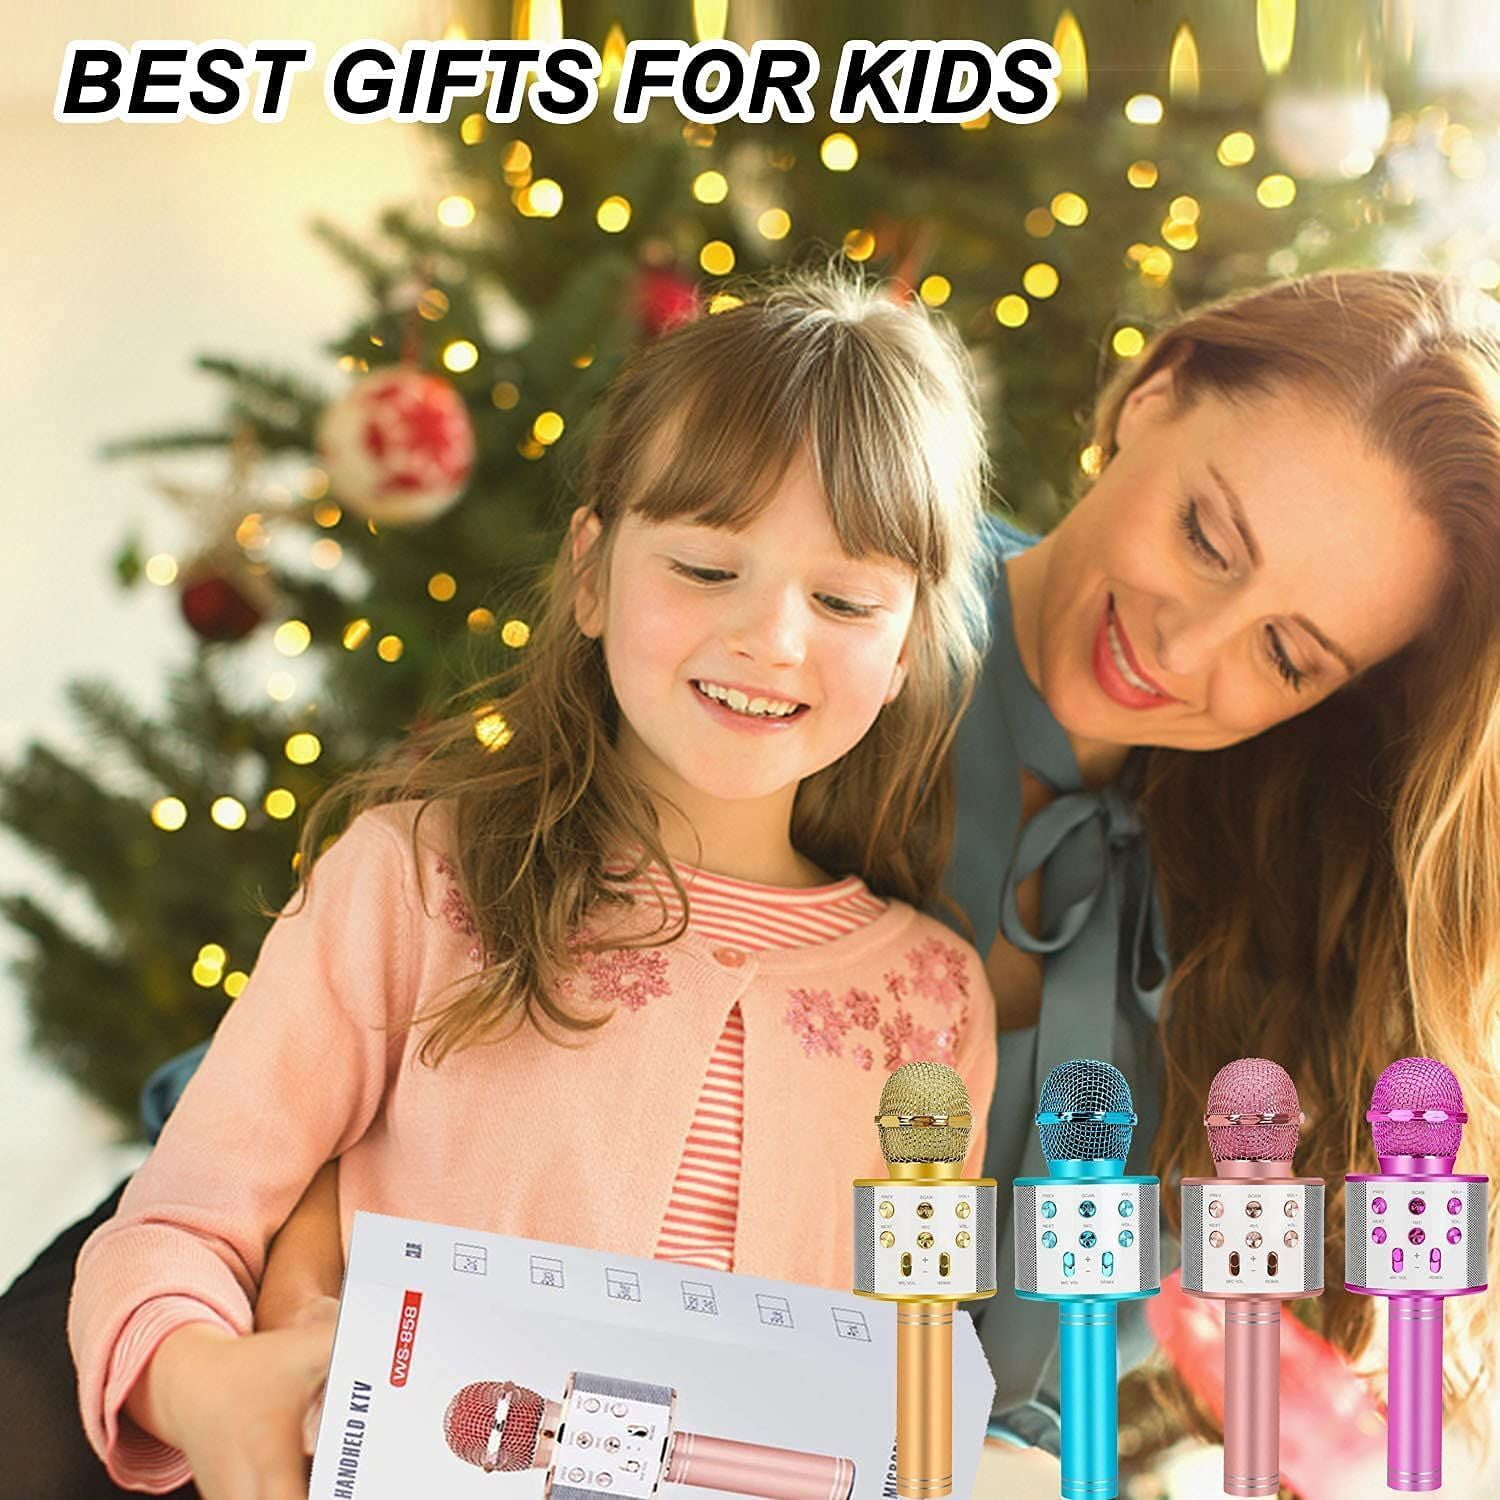 Toys for 5-14 Year Old Girls Wireless Bluetooth Karaoke Microphone for Kids Adults Birthday Gifts for Girls Boys Age 5-14 Toys for Girls Boys Age 5-14 Xmas Stocking Fillers Gold WKUSMKF01 